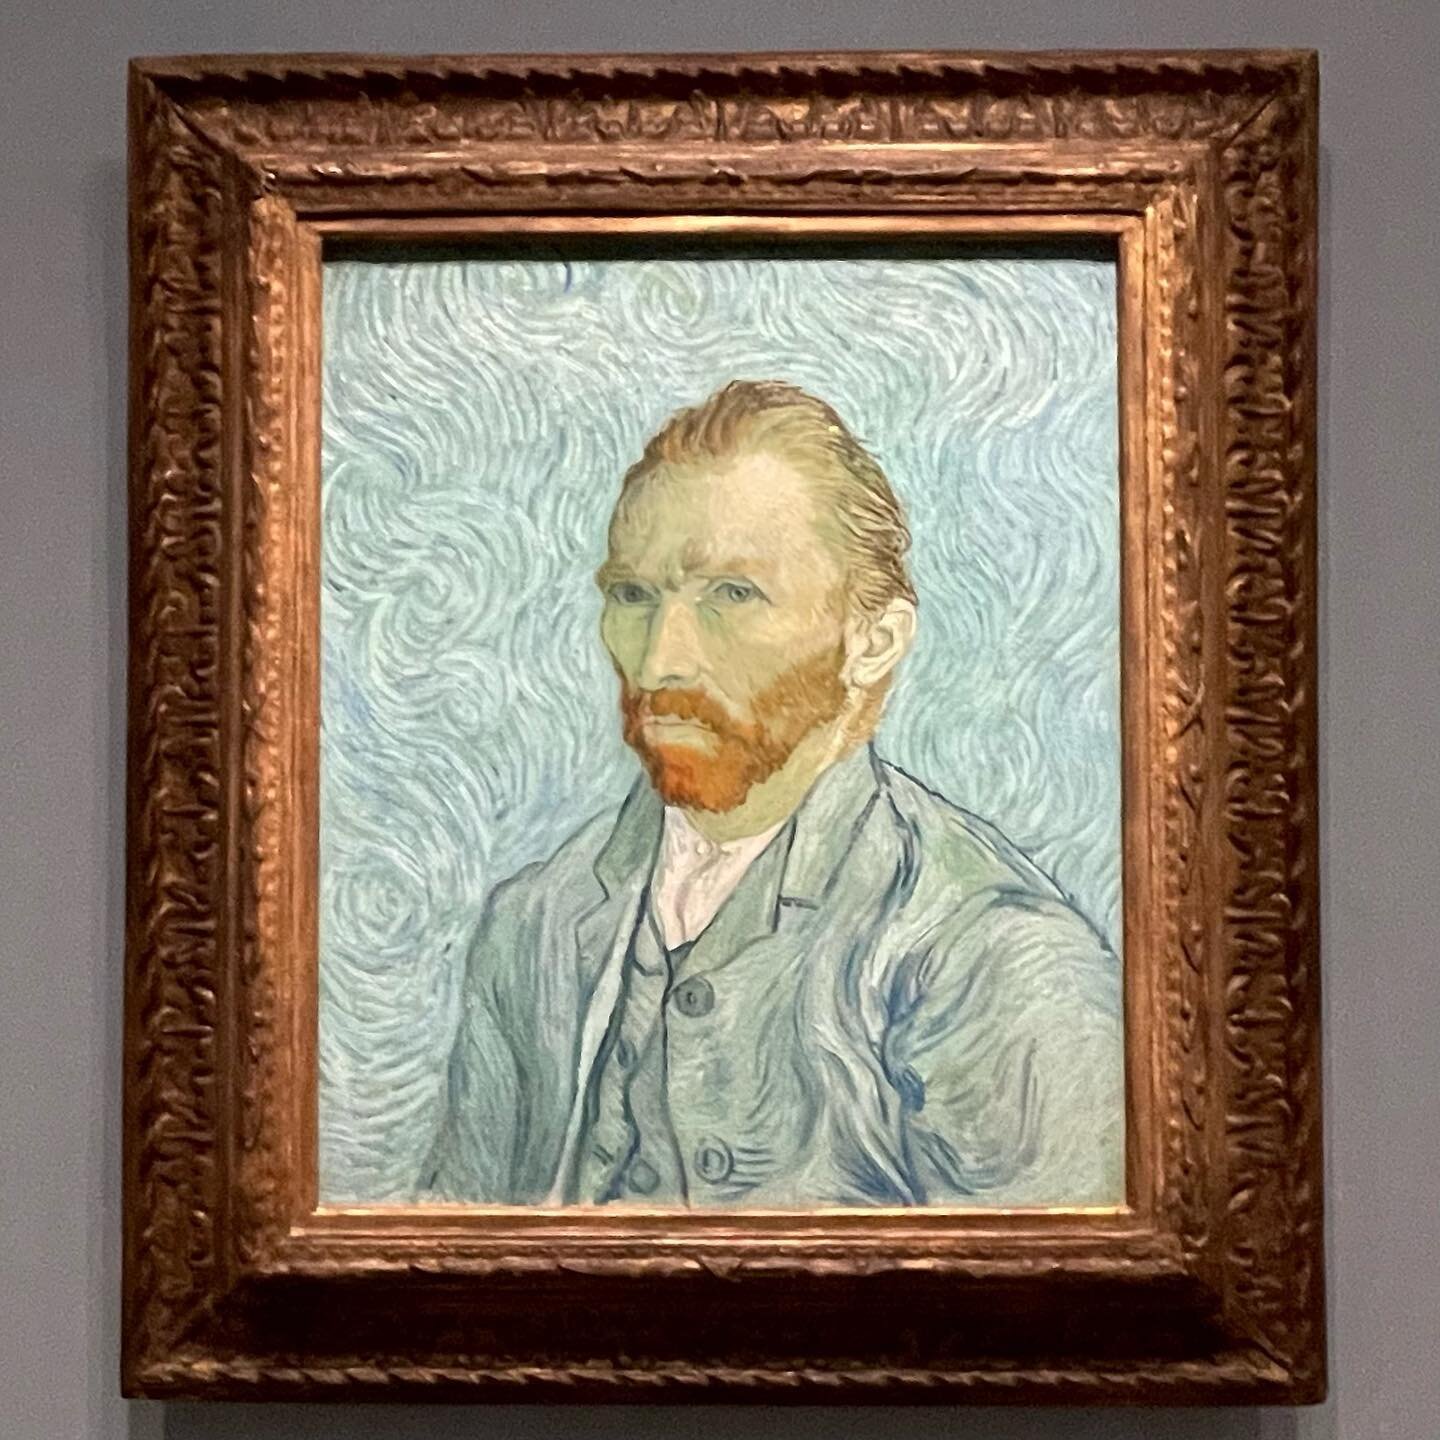 One of the very special experiences in Paris is the Mus&eacute;e d&rsquo;Orsay&rsquo;s private hours &mdash; this year we were able to see &ldquo;Van Gogh in Auvers-sur-Oise The Final Months&rdquo; with only a handful of people. The exhibition explor